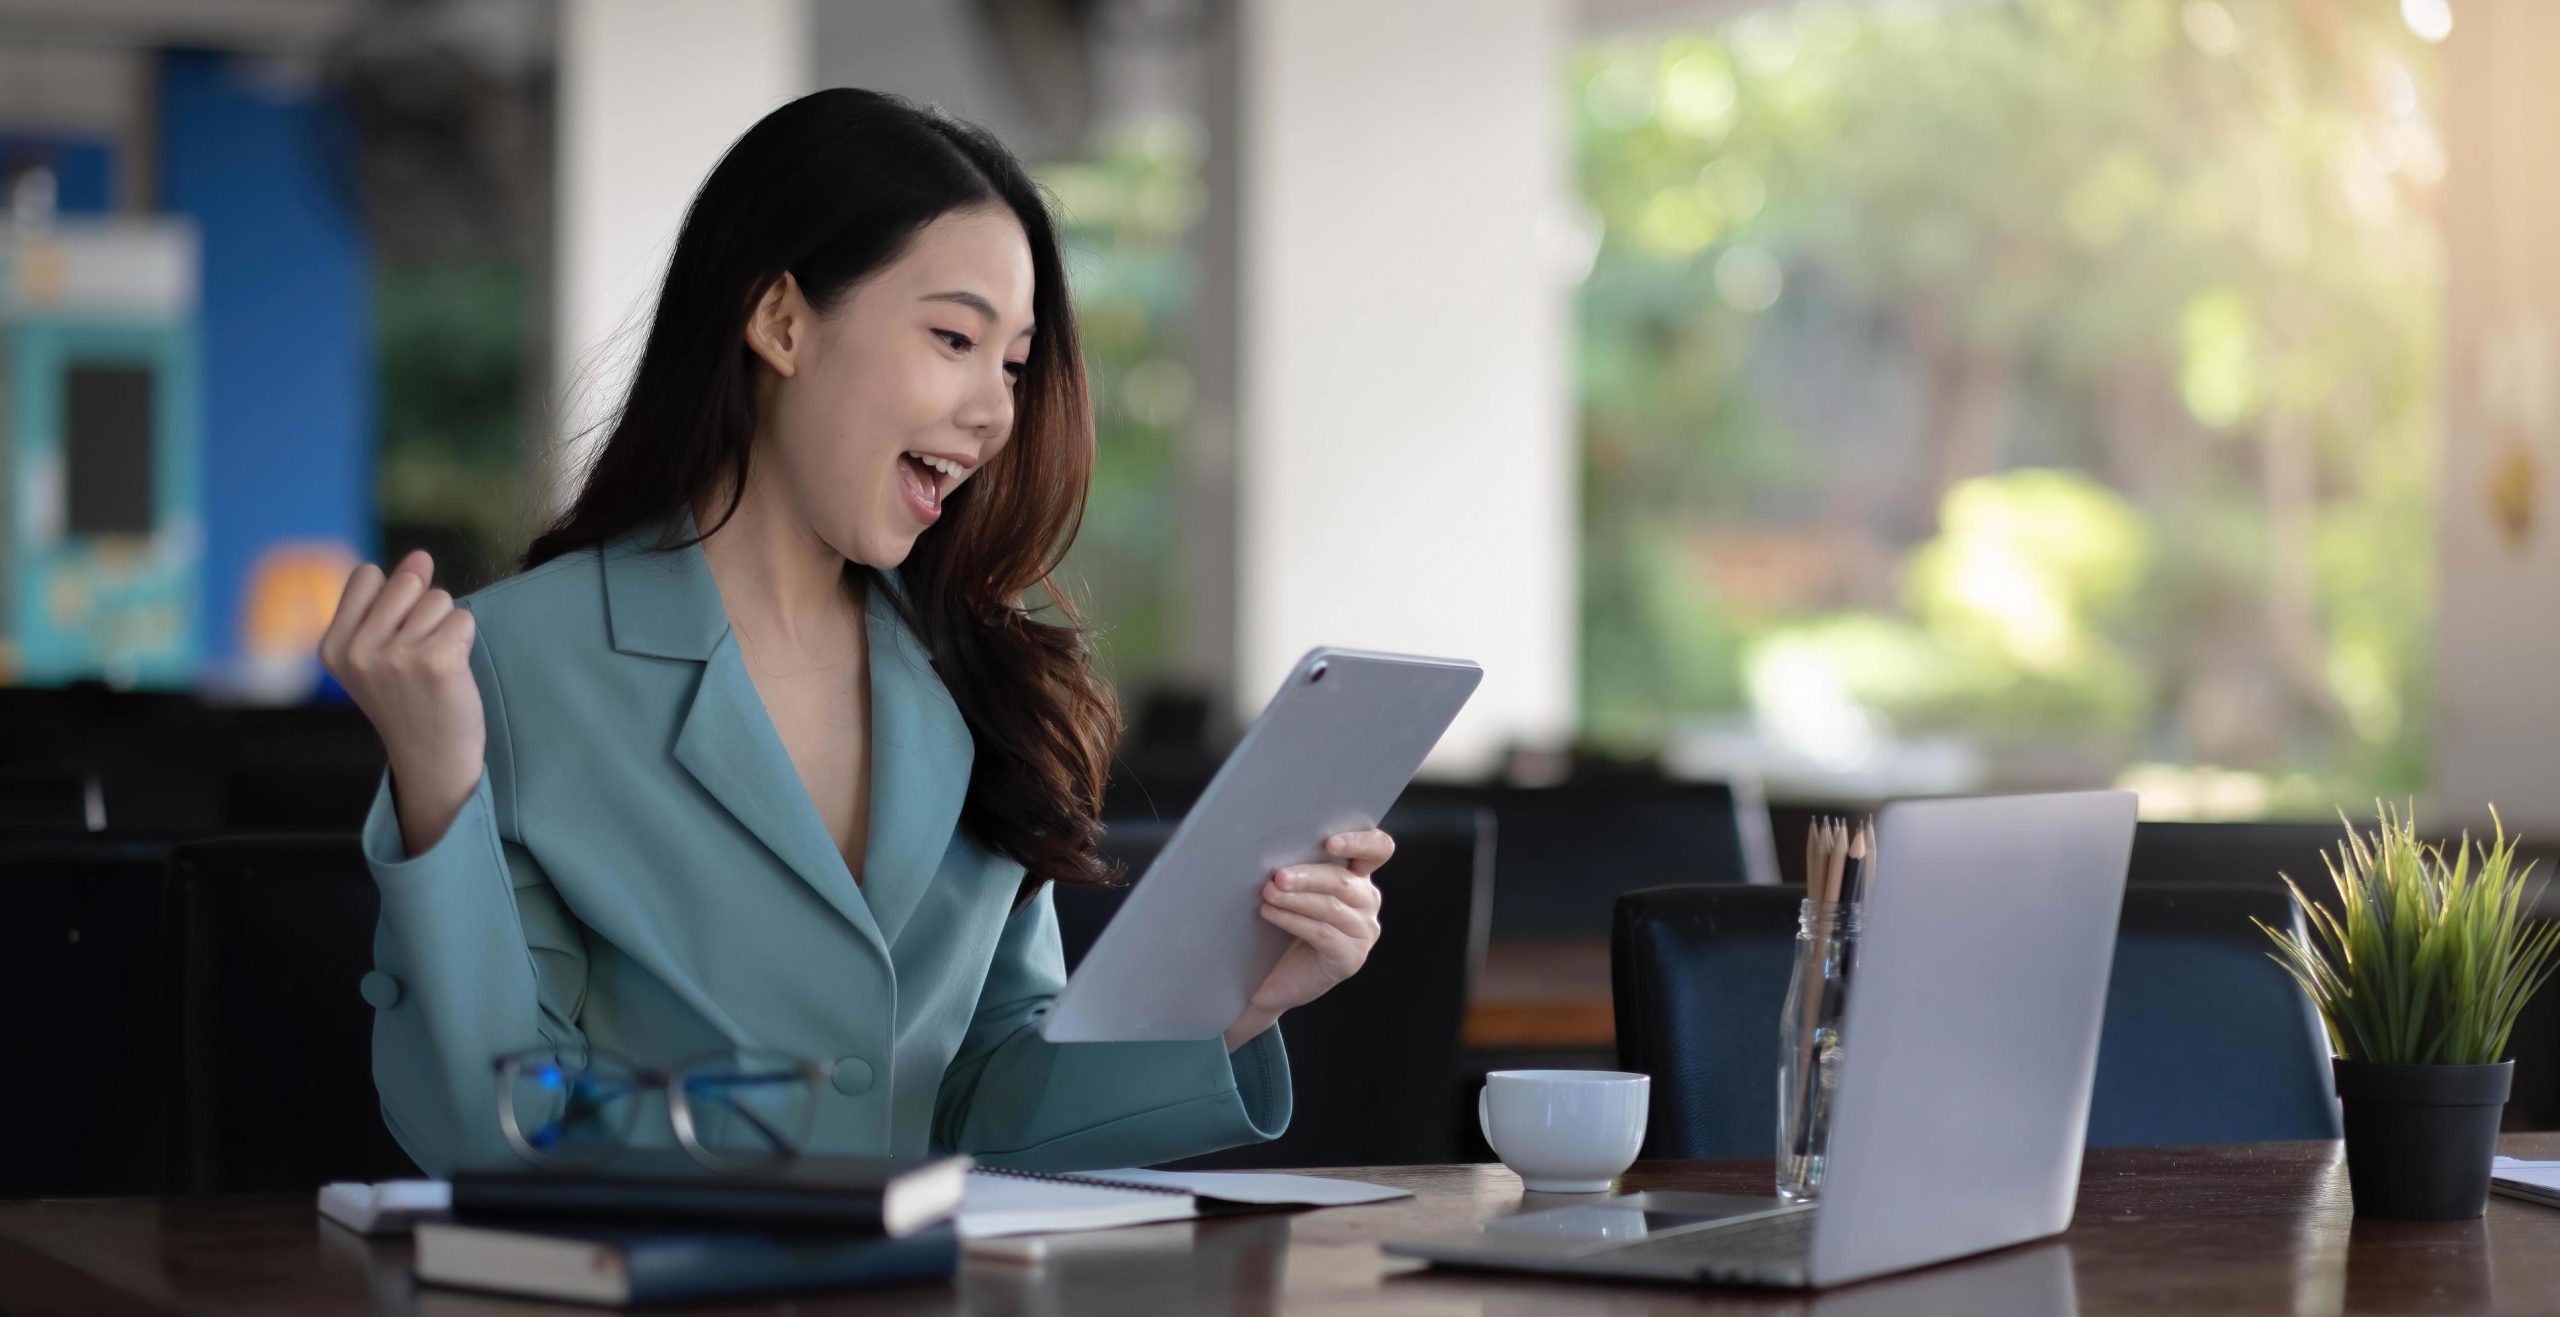 asian-business-woman-are-delighted-and-happy-with-the-work-they-do-on-their-laptop-and-taking-notes-at-the-office-free-photo-1